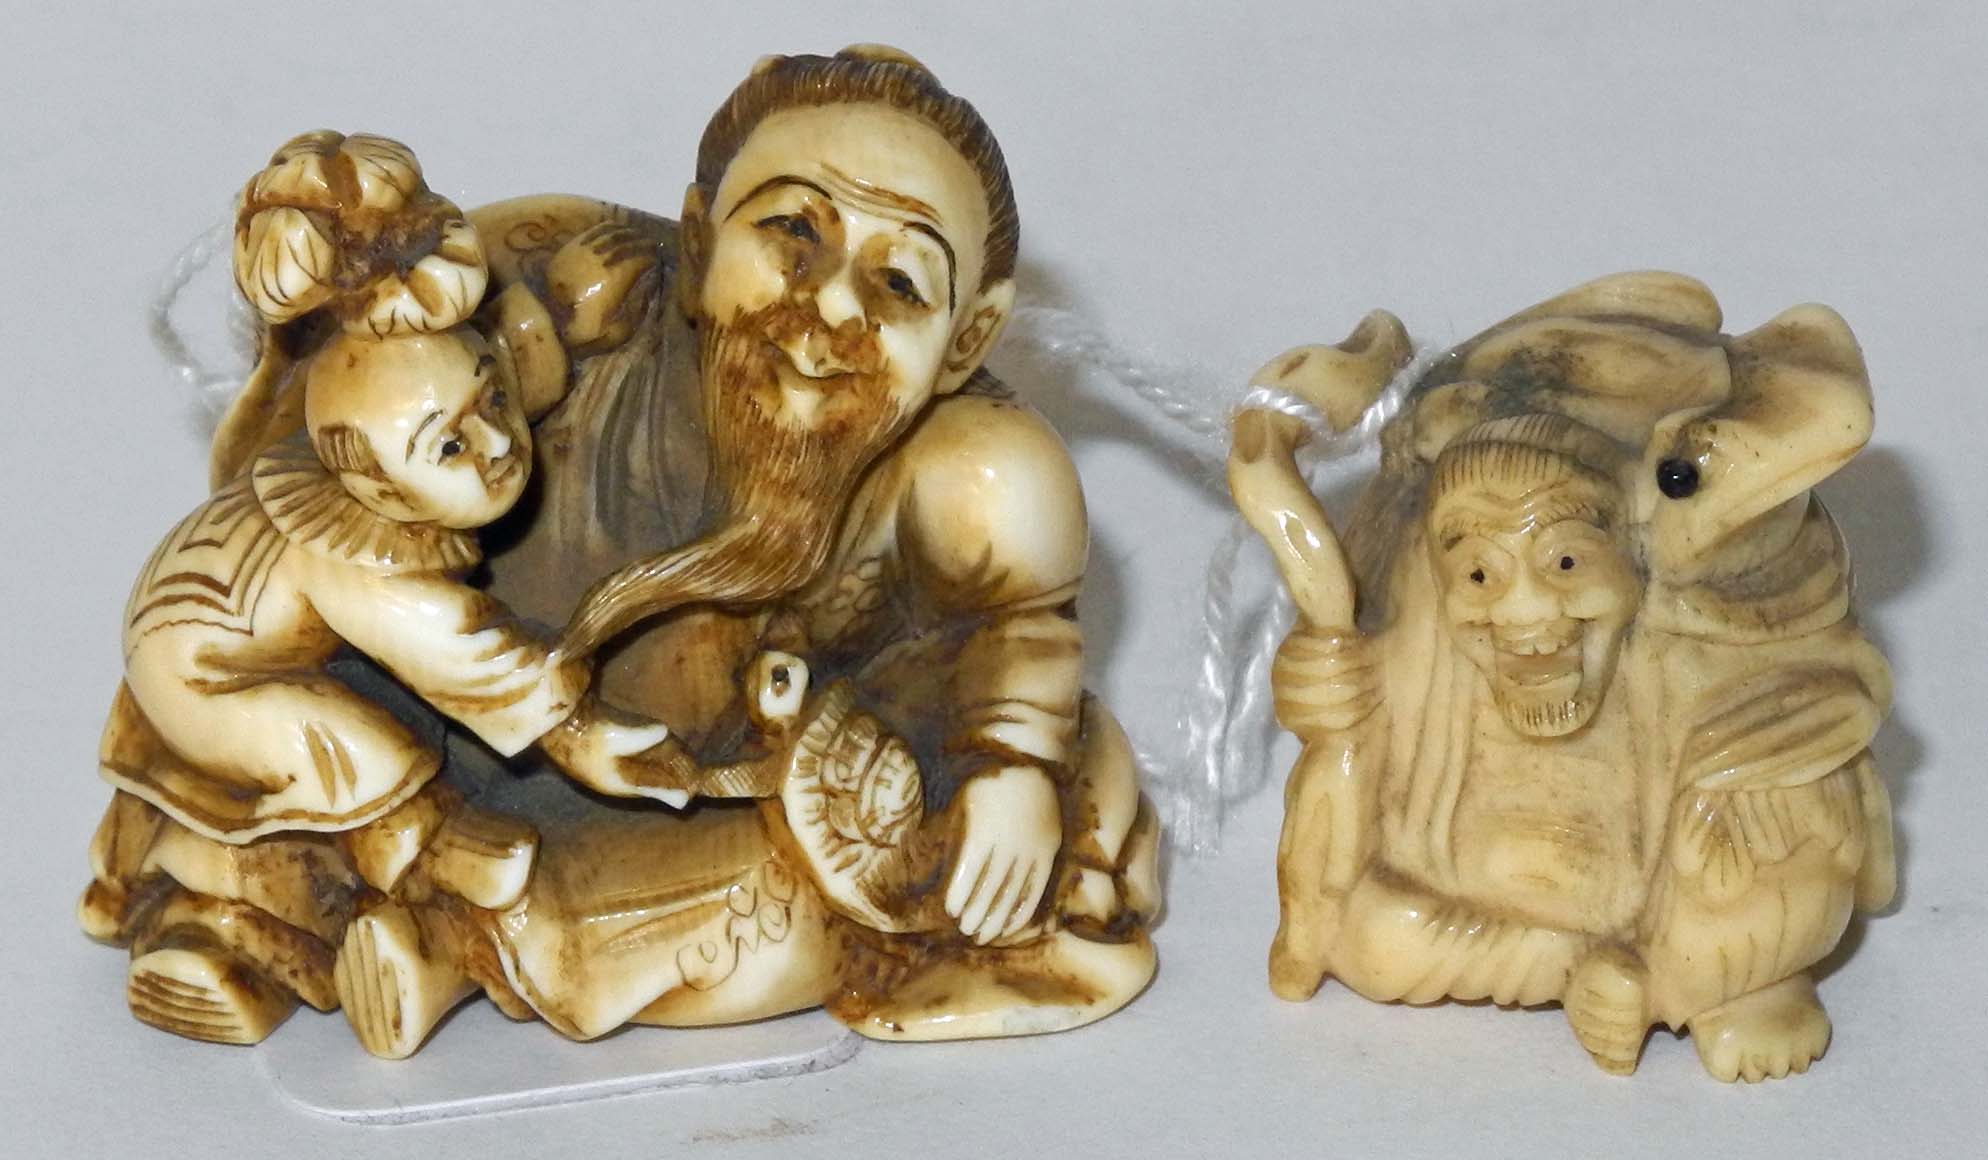 A Japanese ivory netsuke of an elderly man seated with a child and turtle, signed, together with